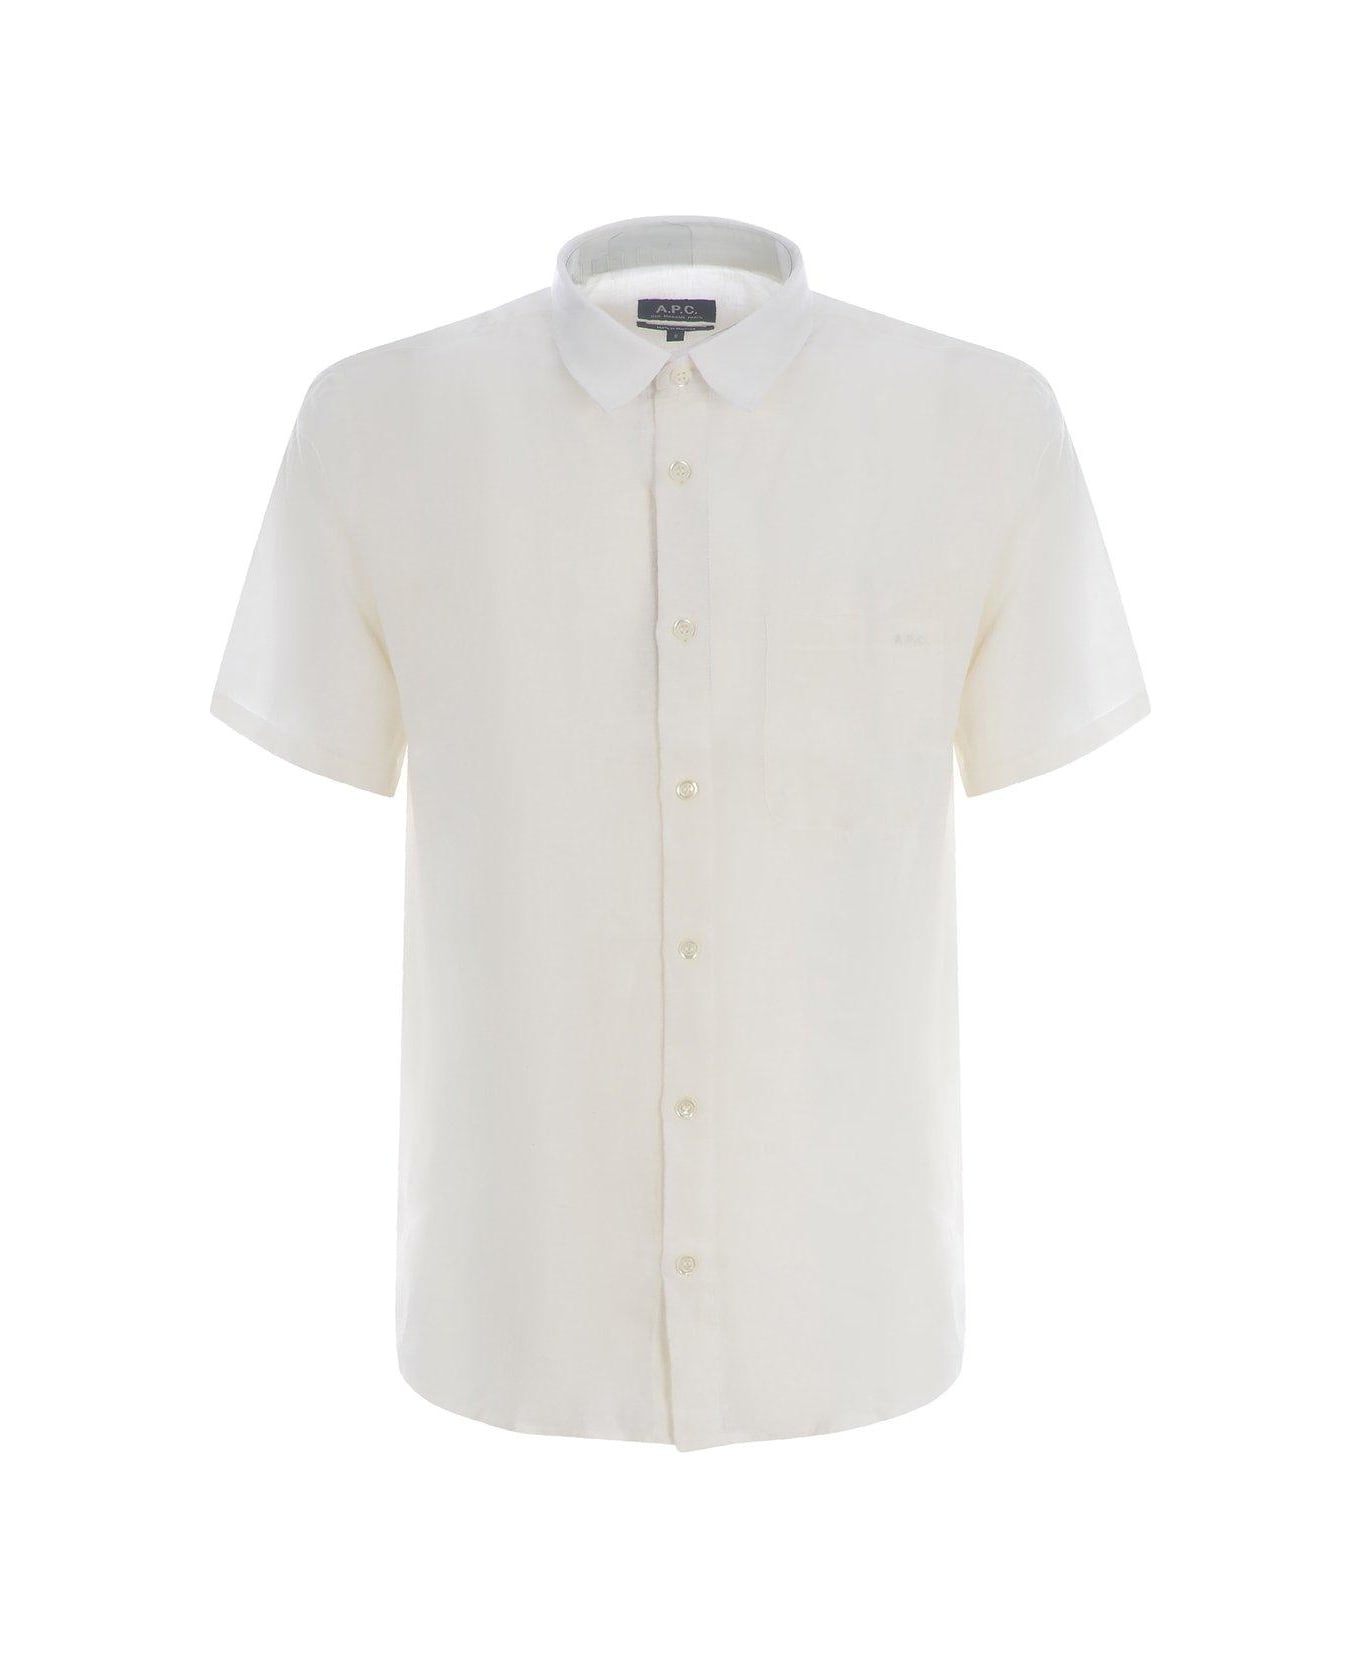 A.P.C. Buttoned Short Sleeved Shirt - White